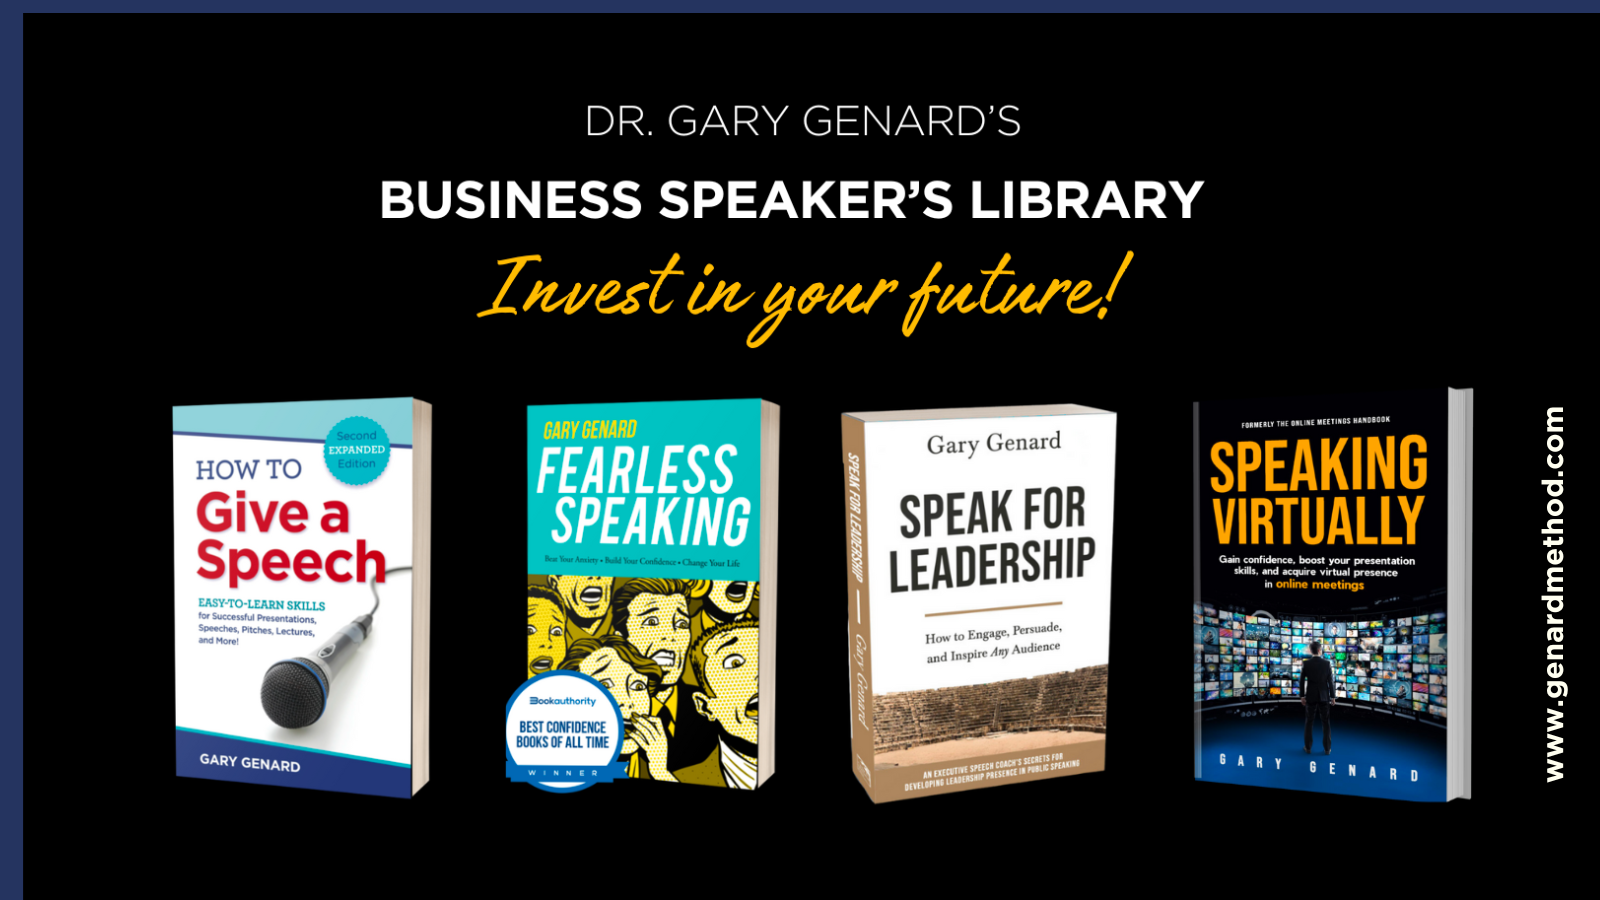 Dr. Gary Genard's Business Speaker's Library for great business presentations.